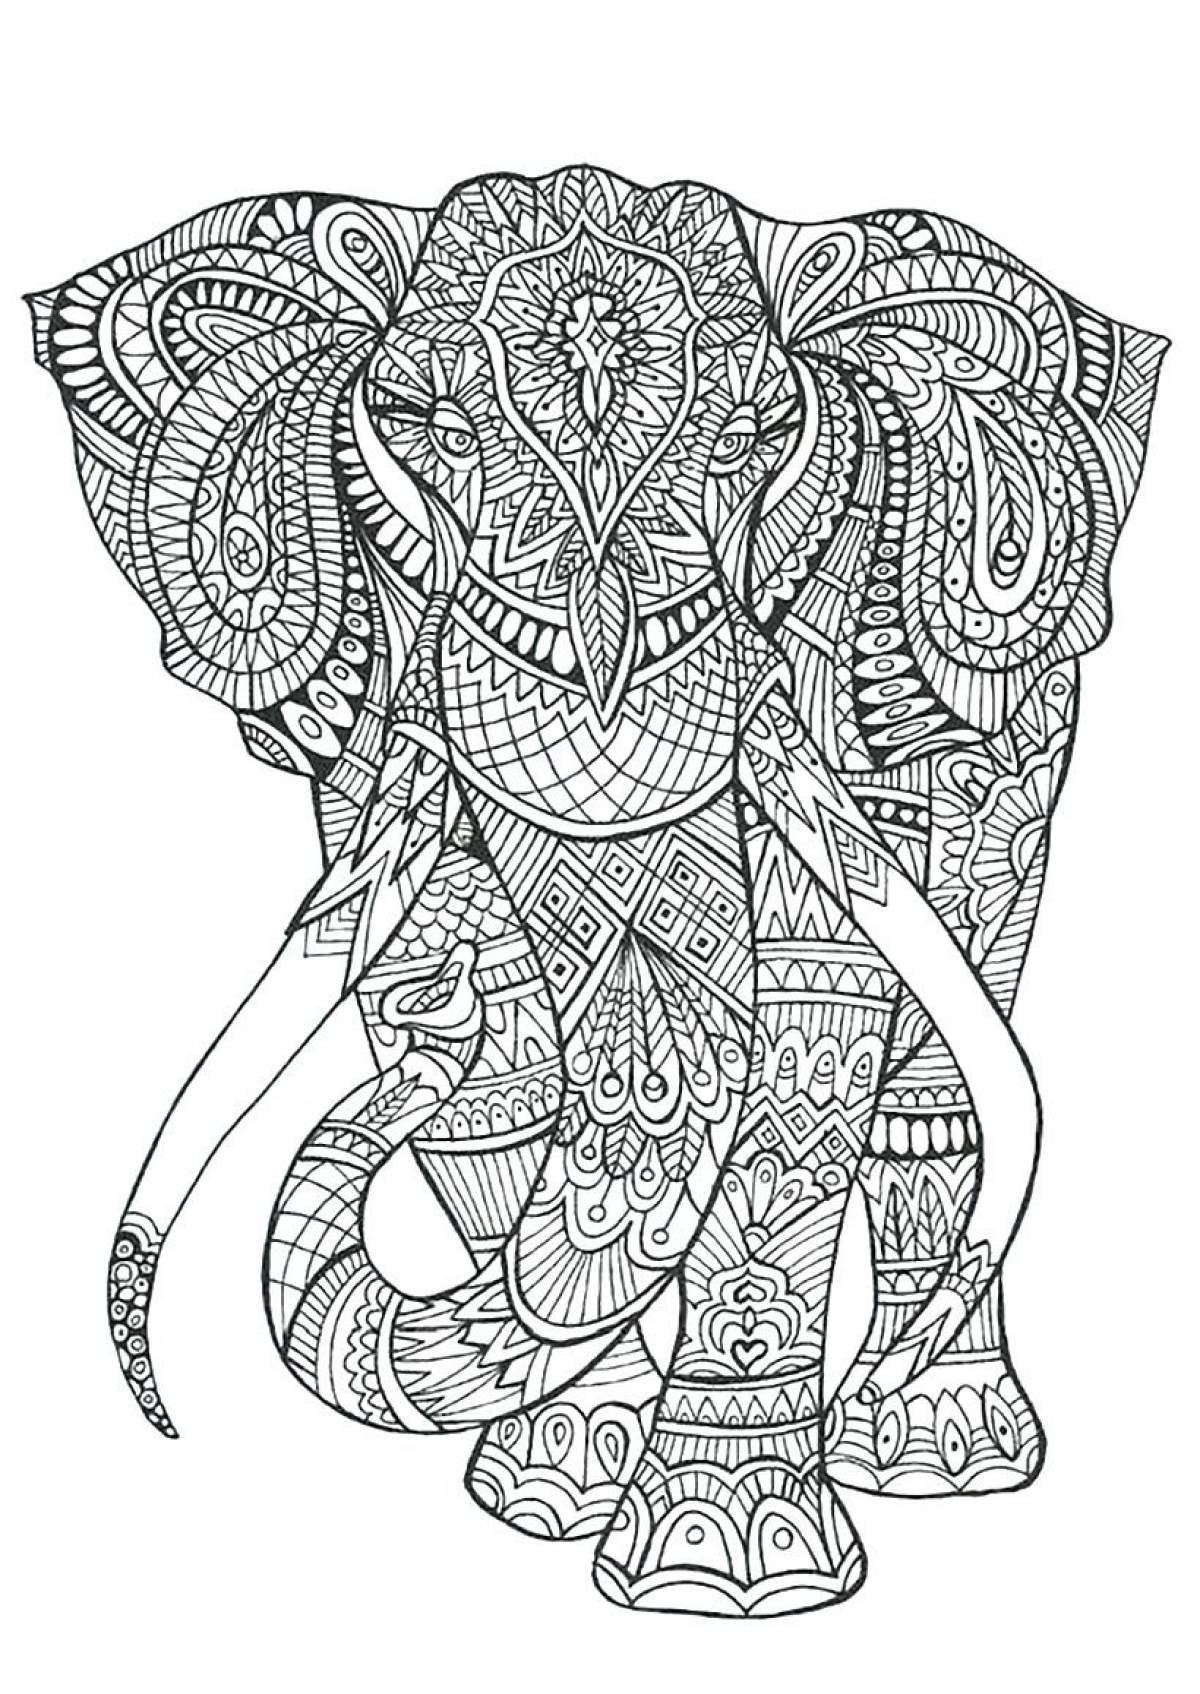 Great animal coloring book